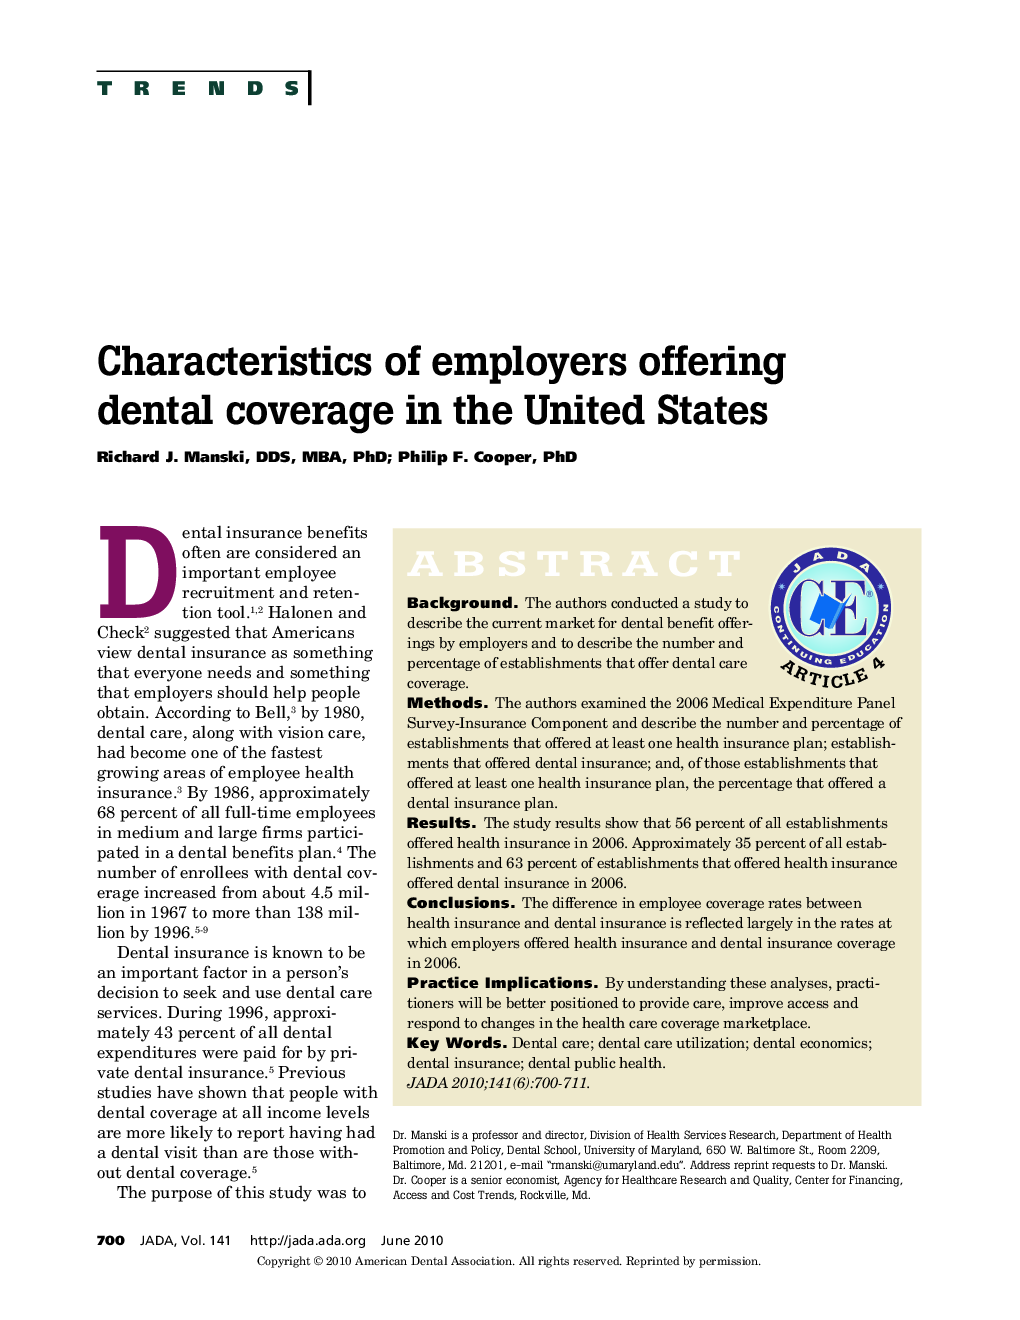 Characteristics of Employers Offering Dental Coverage in the United States 